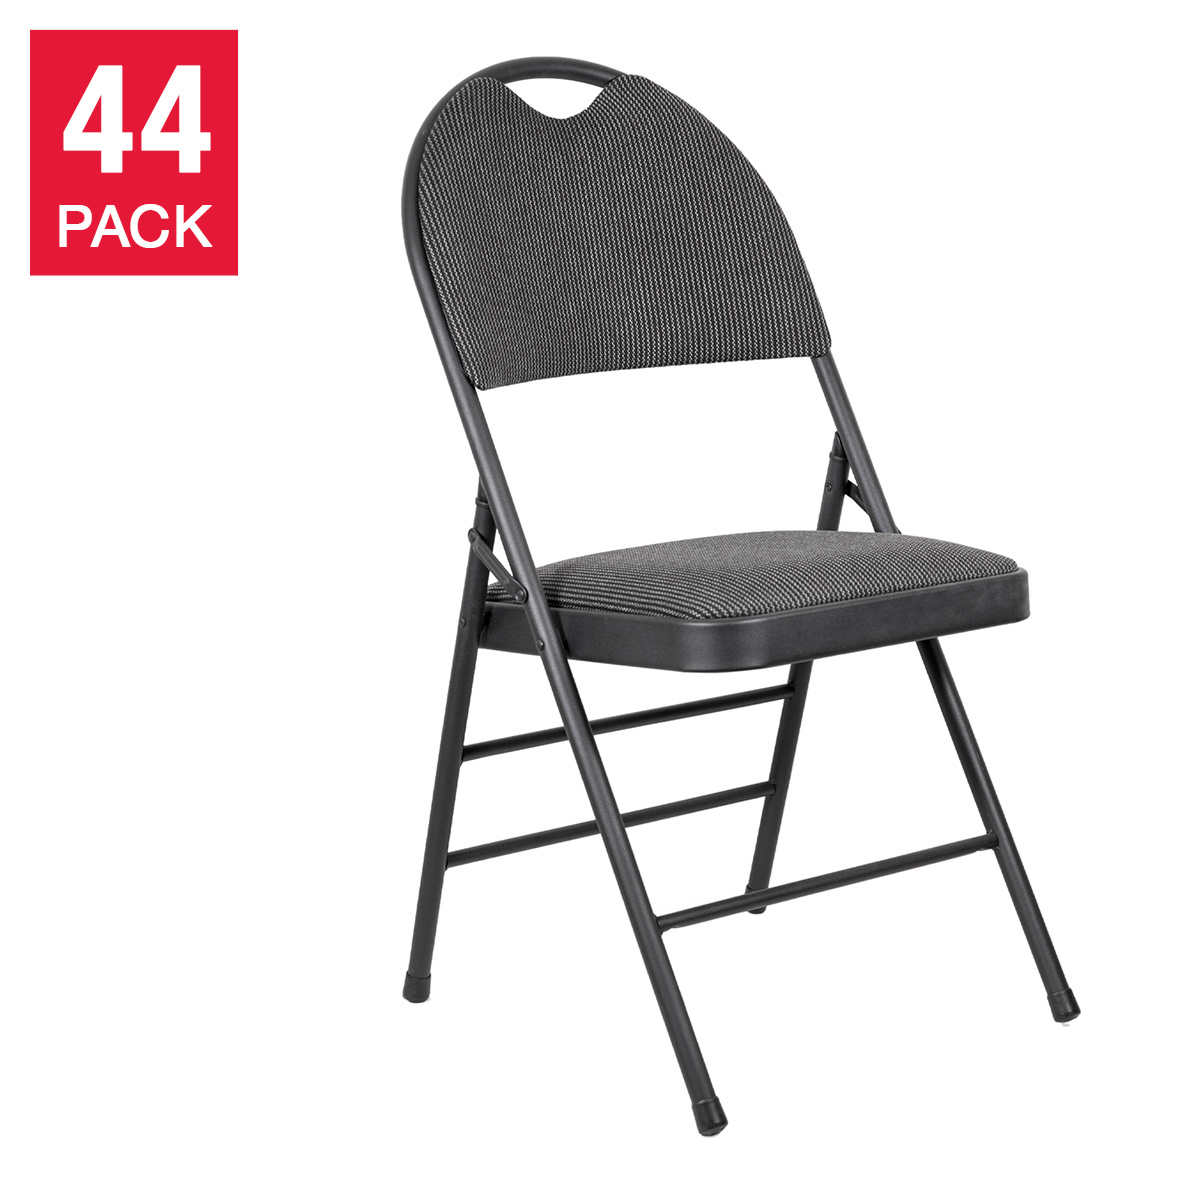 Star Elite Commercial High Back Folding Chairs